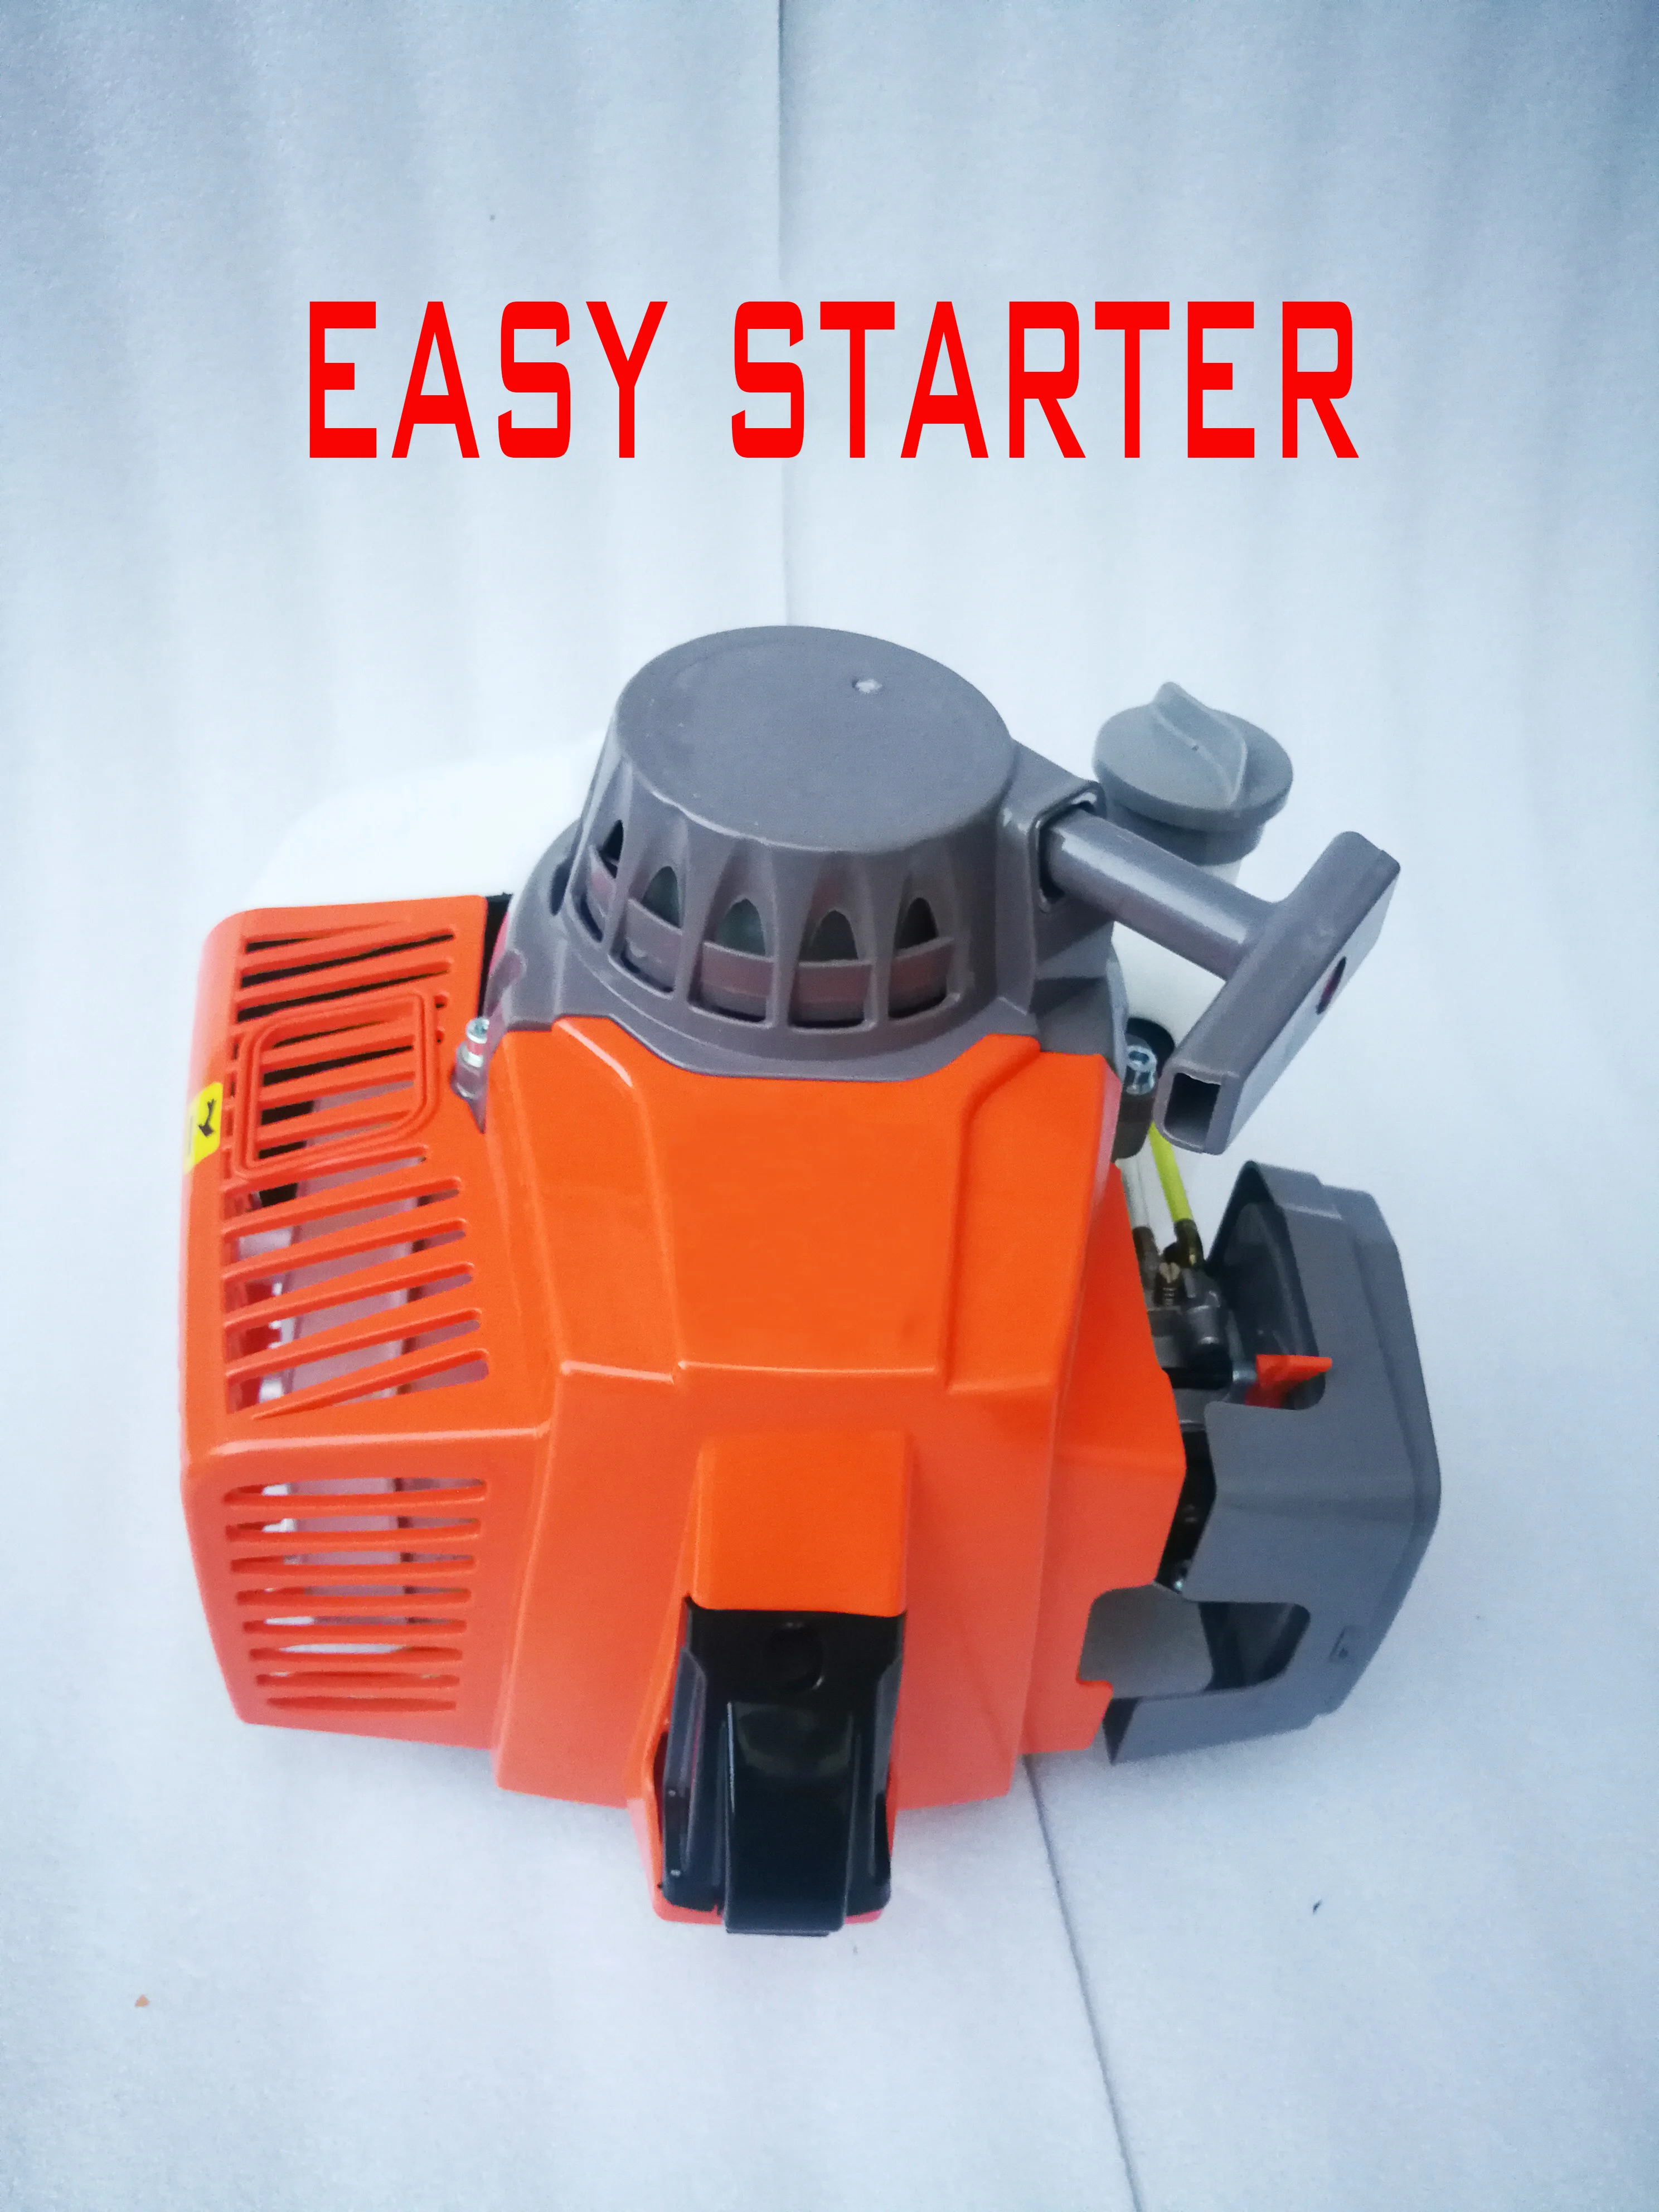 Really 80cc 1E53F 2T Gasoline Engine 2 Stroke For Earth Drill Brush Cutter Goped Scooter Outboard Motor 53mm Big Bore enlarge